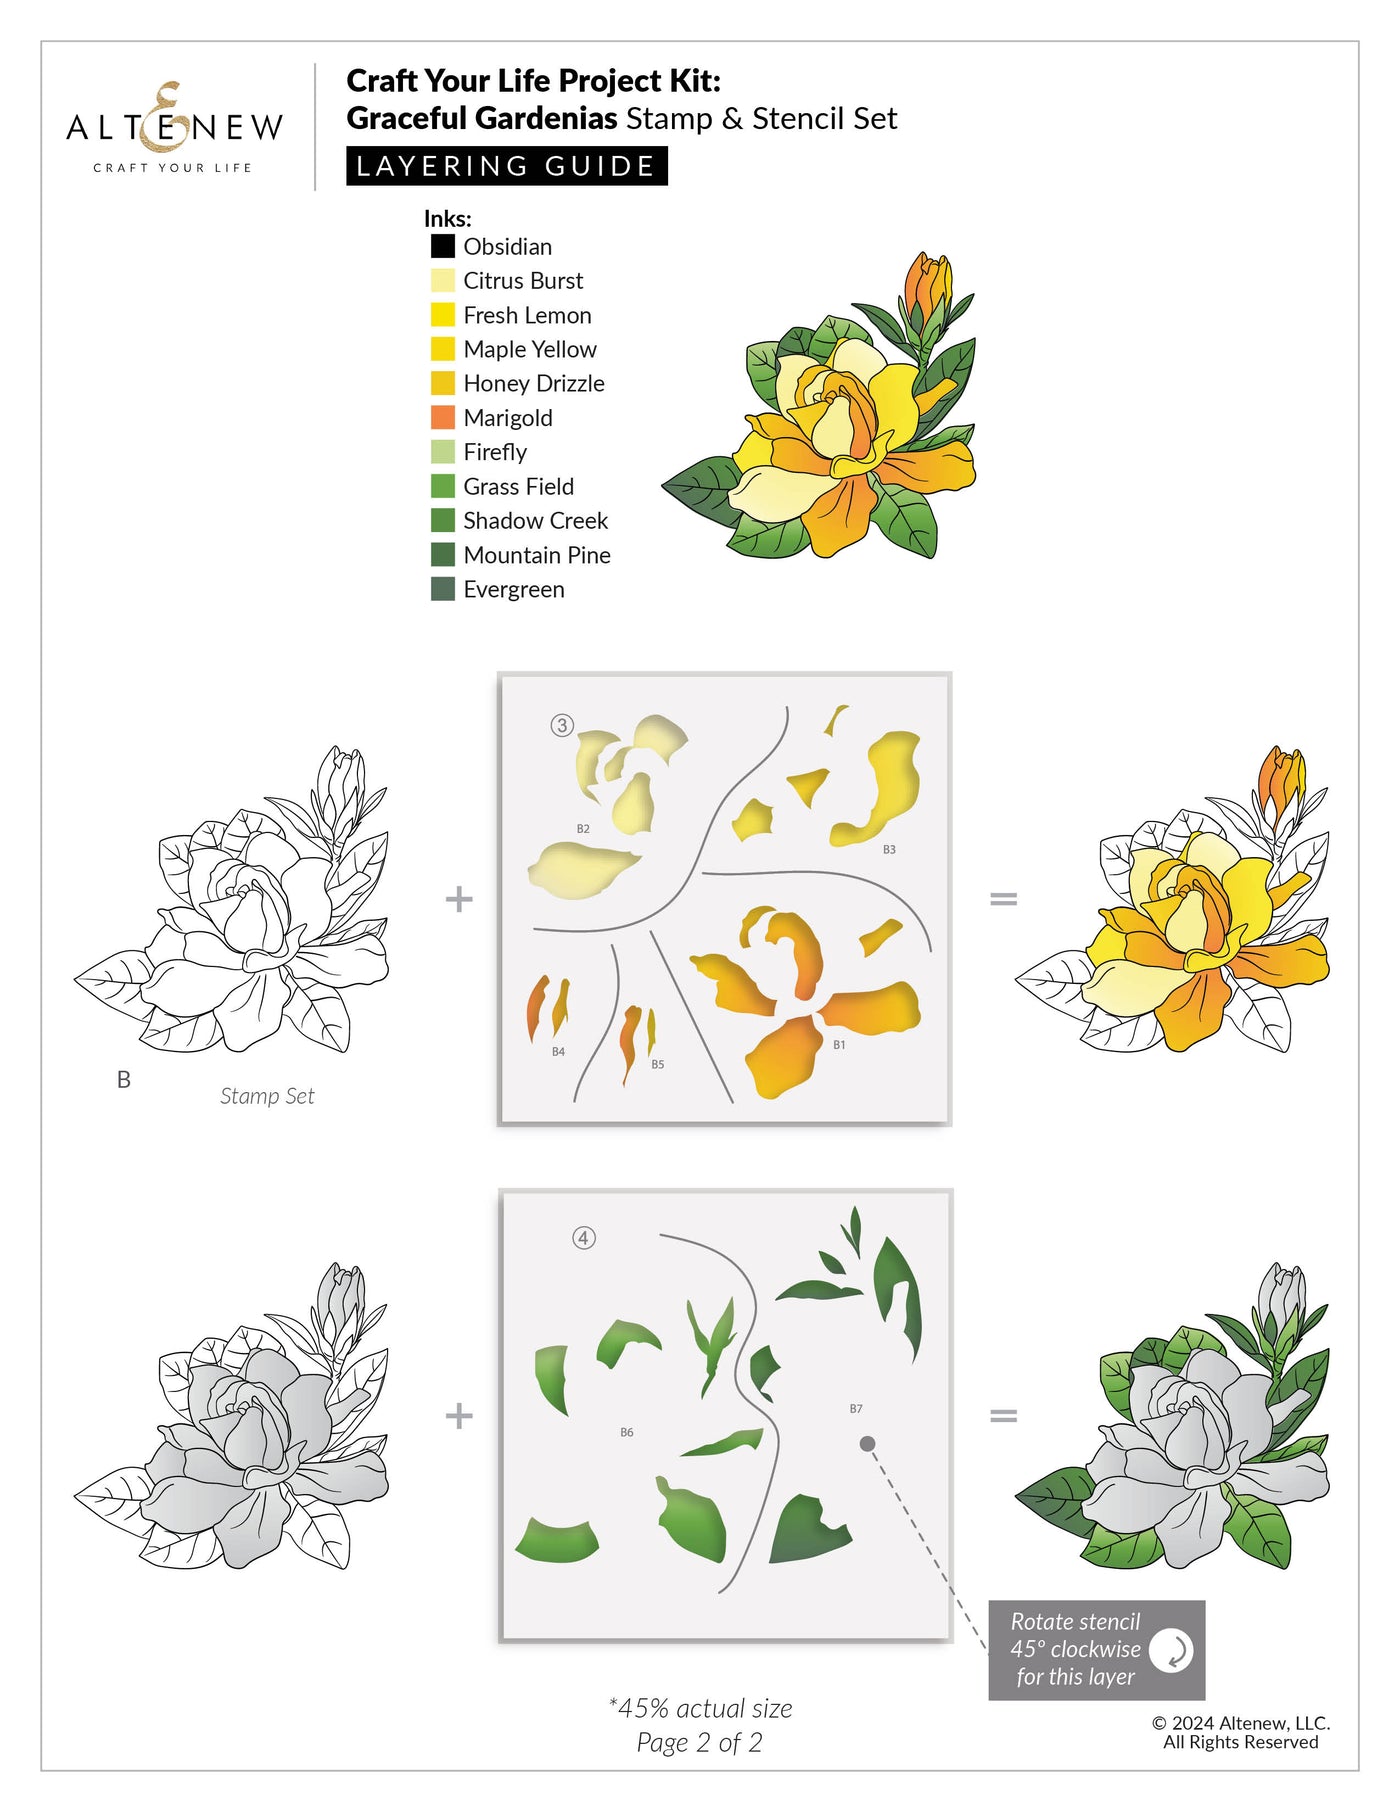 Craft Your Life Project Kit Craft Your Life Project Kit: Graceful Gardenias